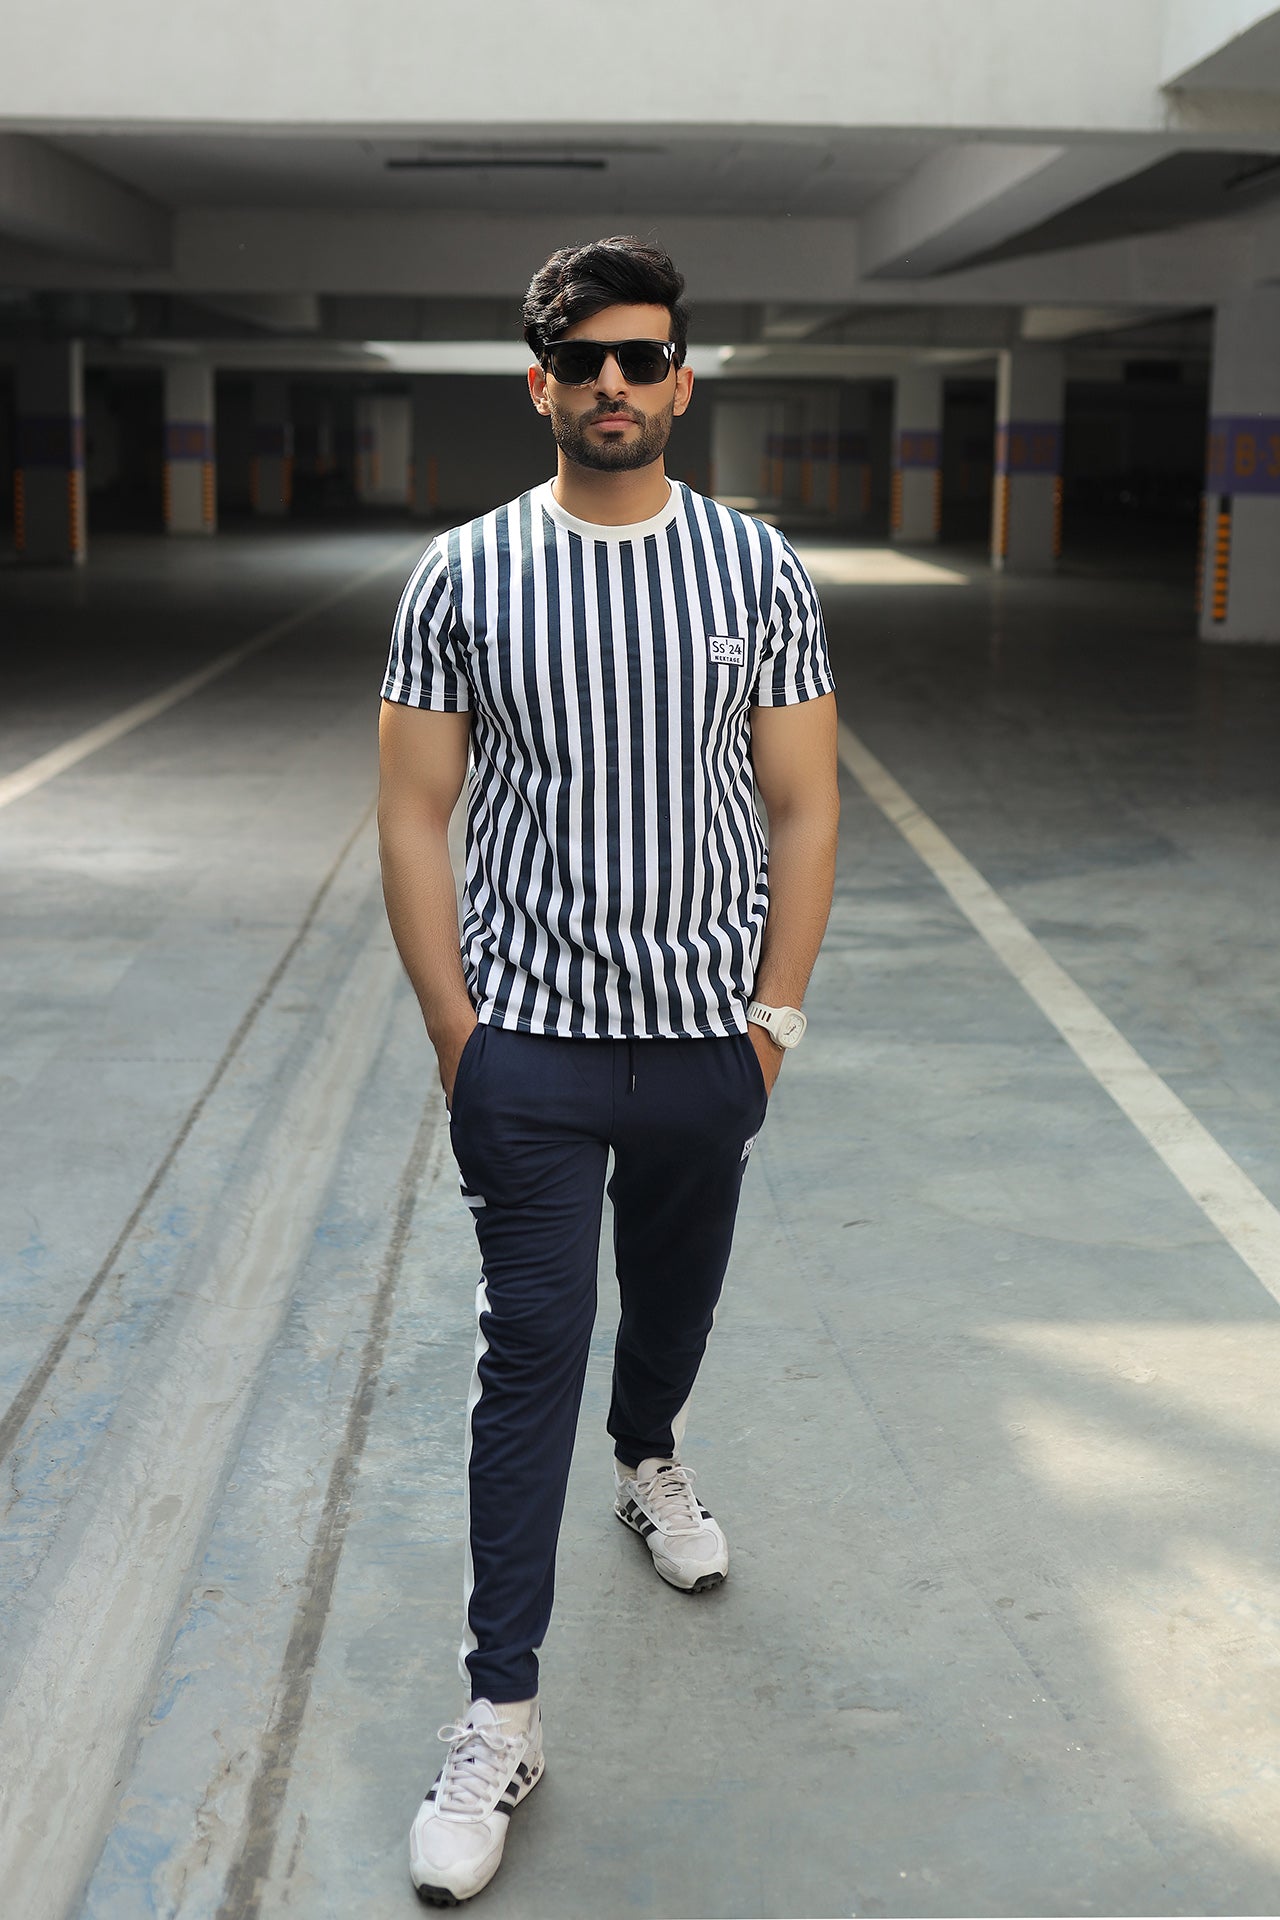 NextAge Selling online Men's Summer Tracksuits in Pakistan,